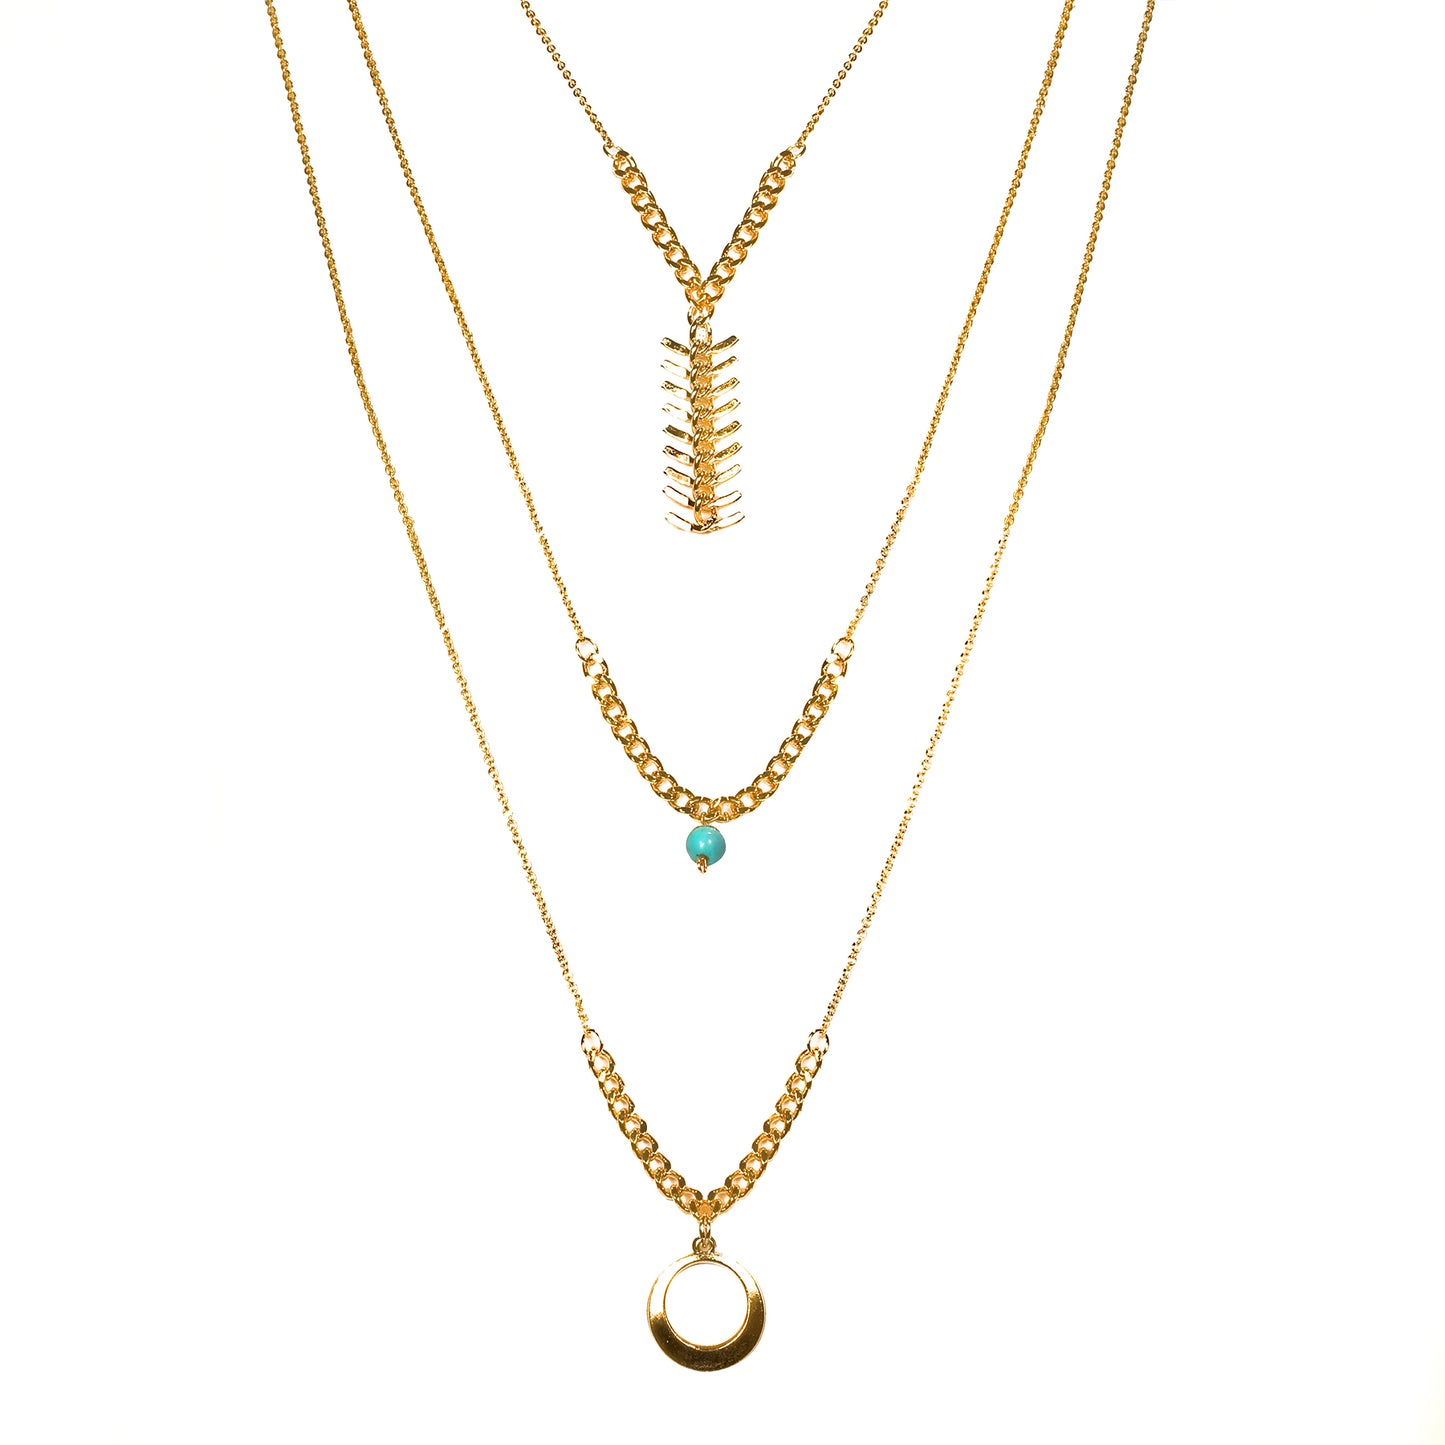 LAYERED TRIPLE NECKLACE IN GOLD